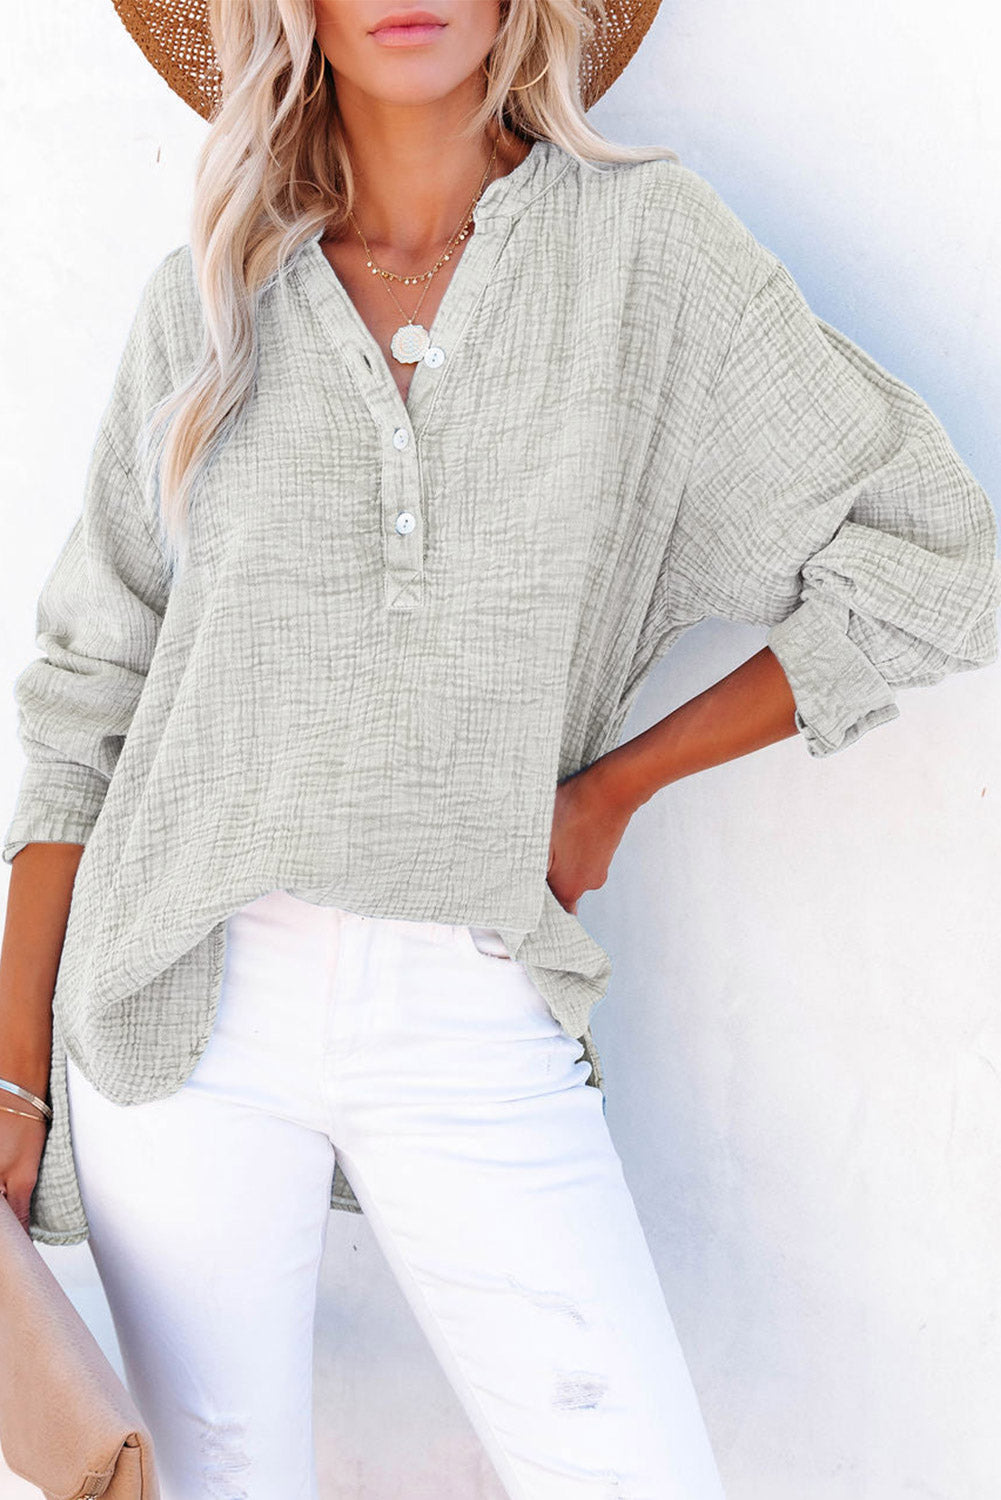 Buttoned Long Sleeve Blouse - Shirt - Wild Willows Boutique - Massapequa, NY, affordable and fashionable clothing for women of all ages. Bottoms, tops, dresses, intimates, outerwear, sweater, shoes, accessories, jewelry, active wear, and more // Wild Willow Boutique.